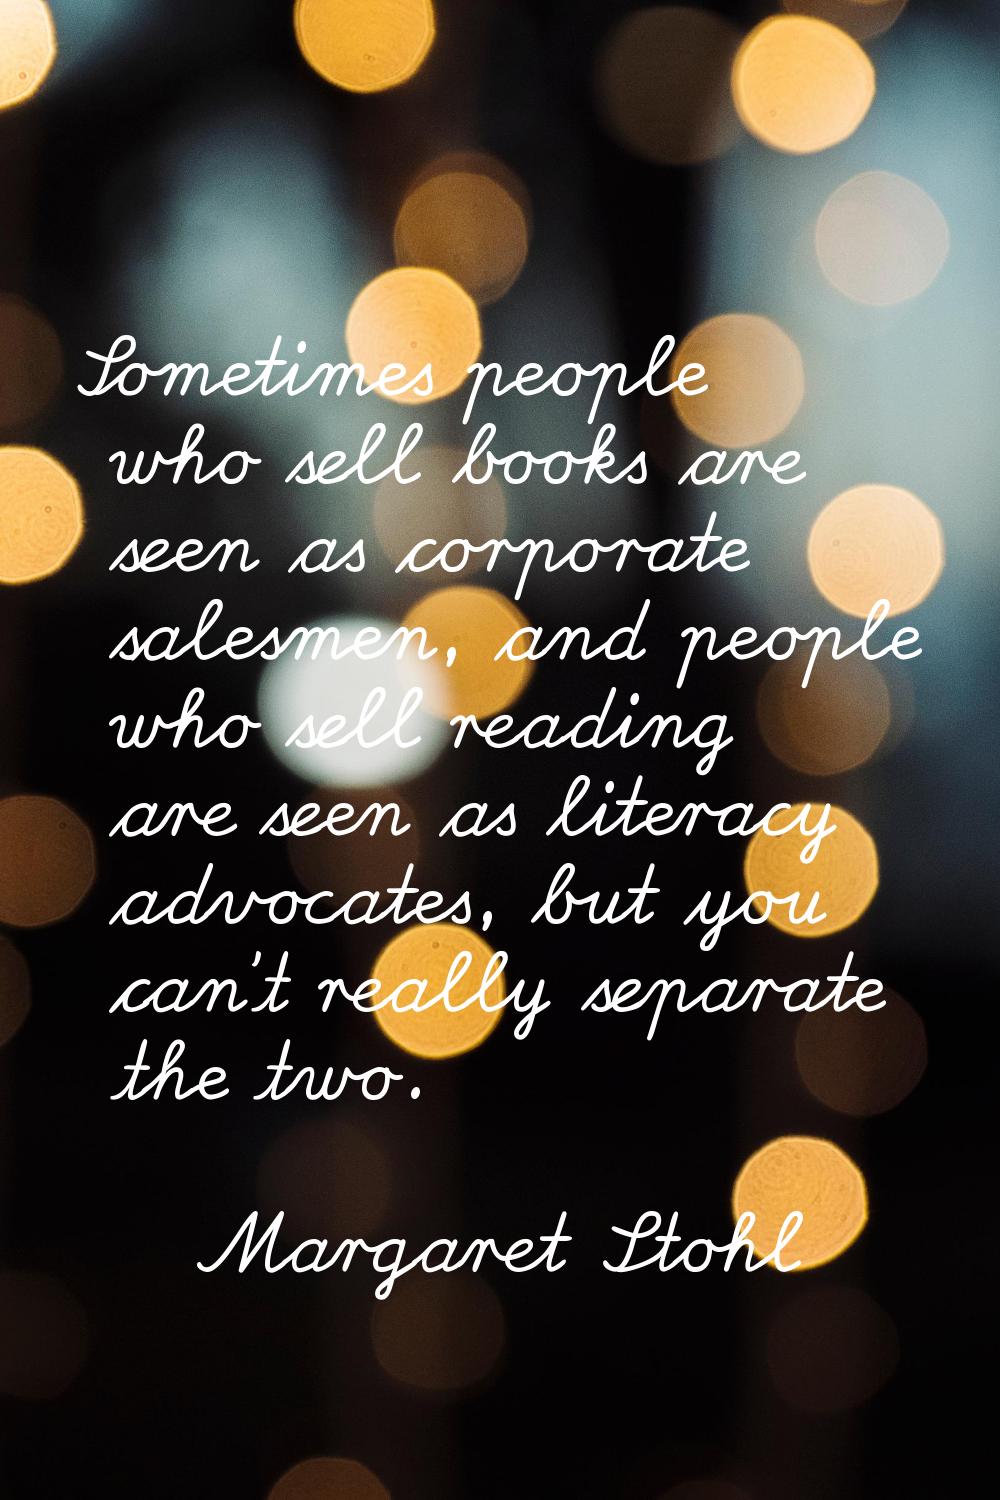 Sometimes people who sell books are seen as corporate salesmen, and people who sell reading are see